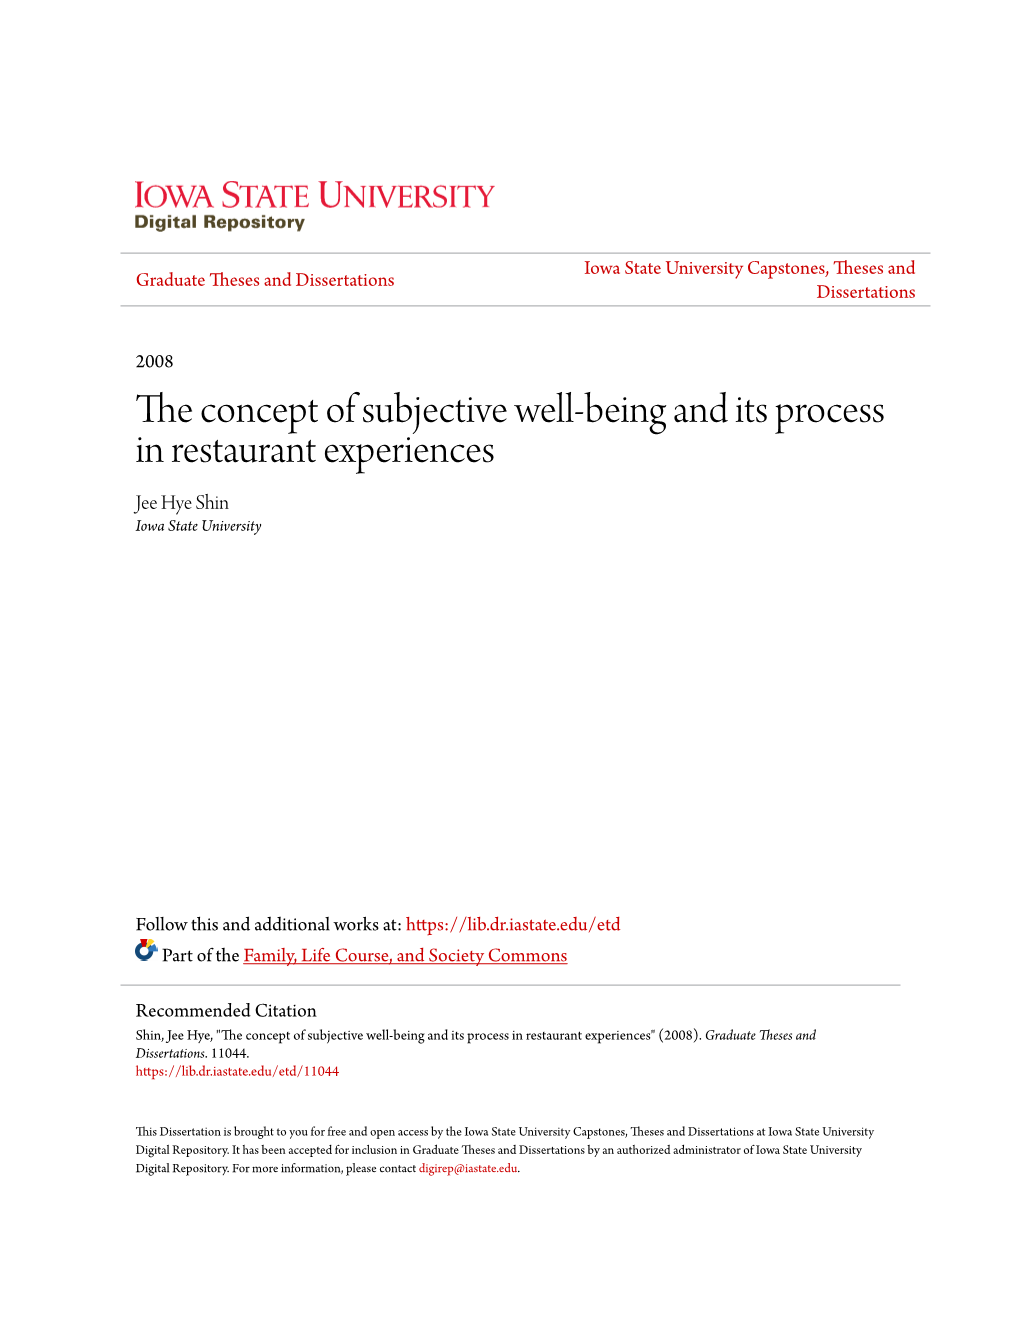 The Concept of Subjective Well-Being and Its Process in Restaurant Experiences